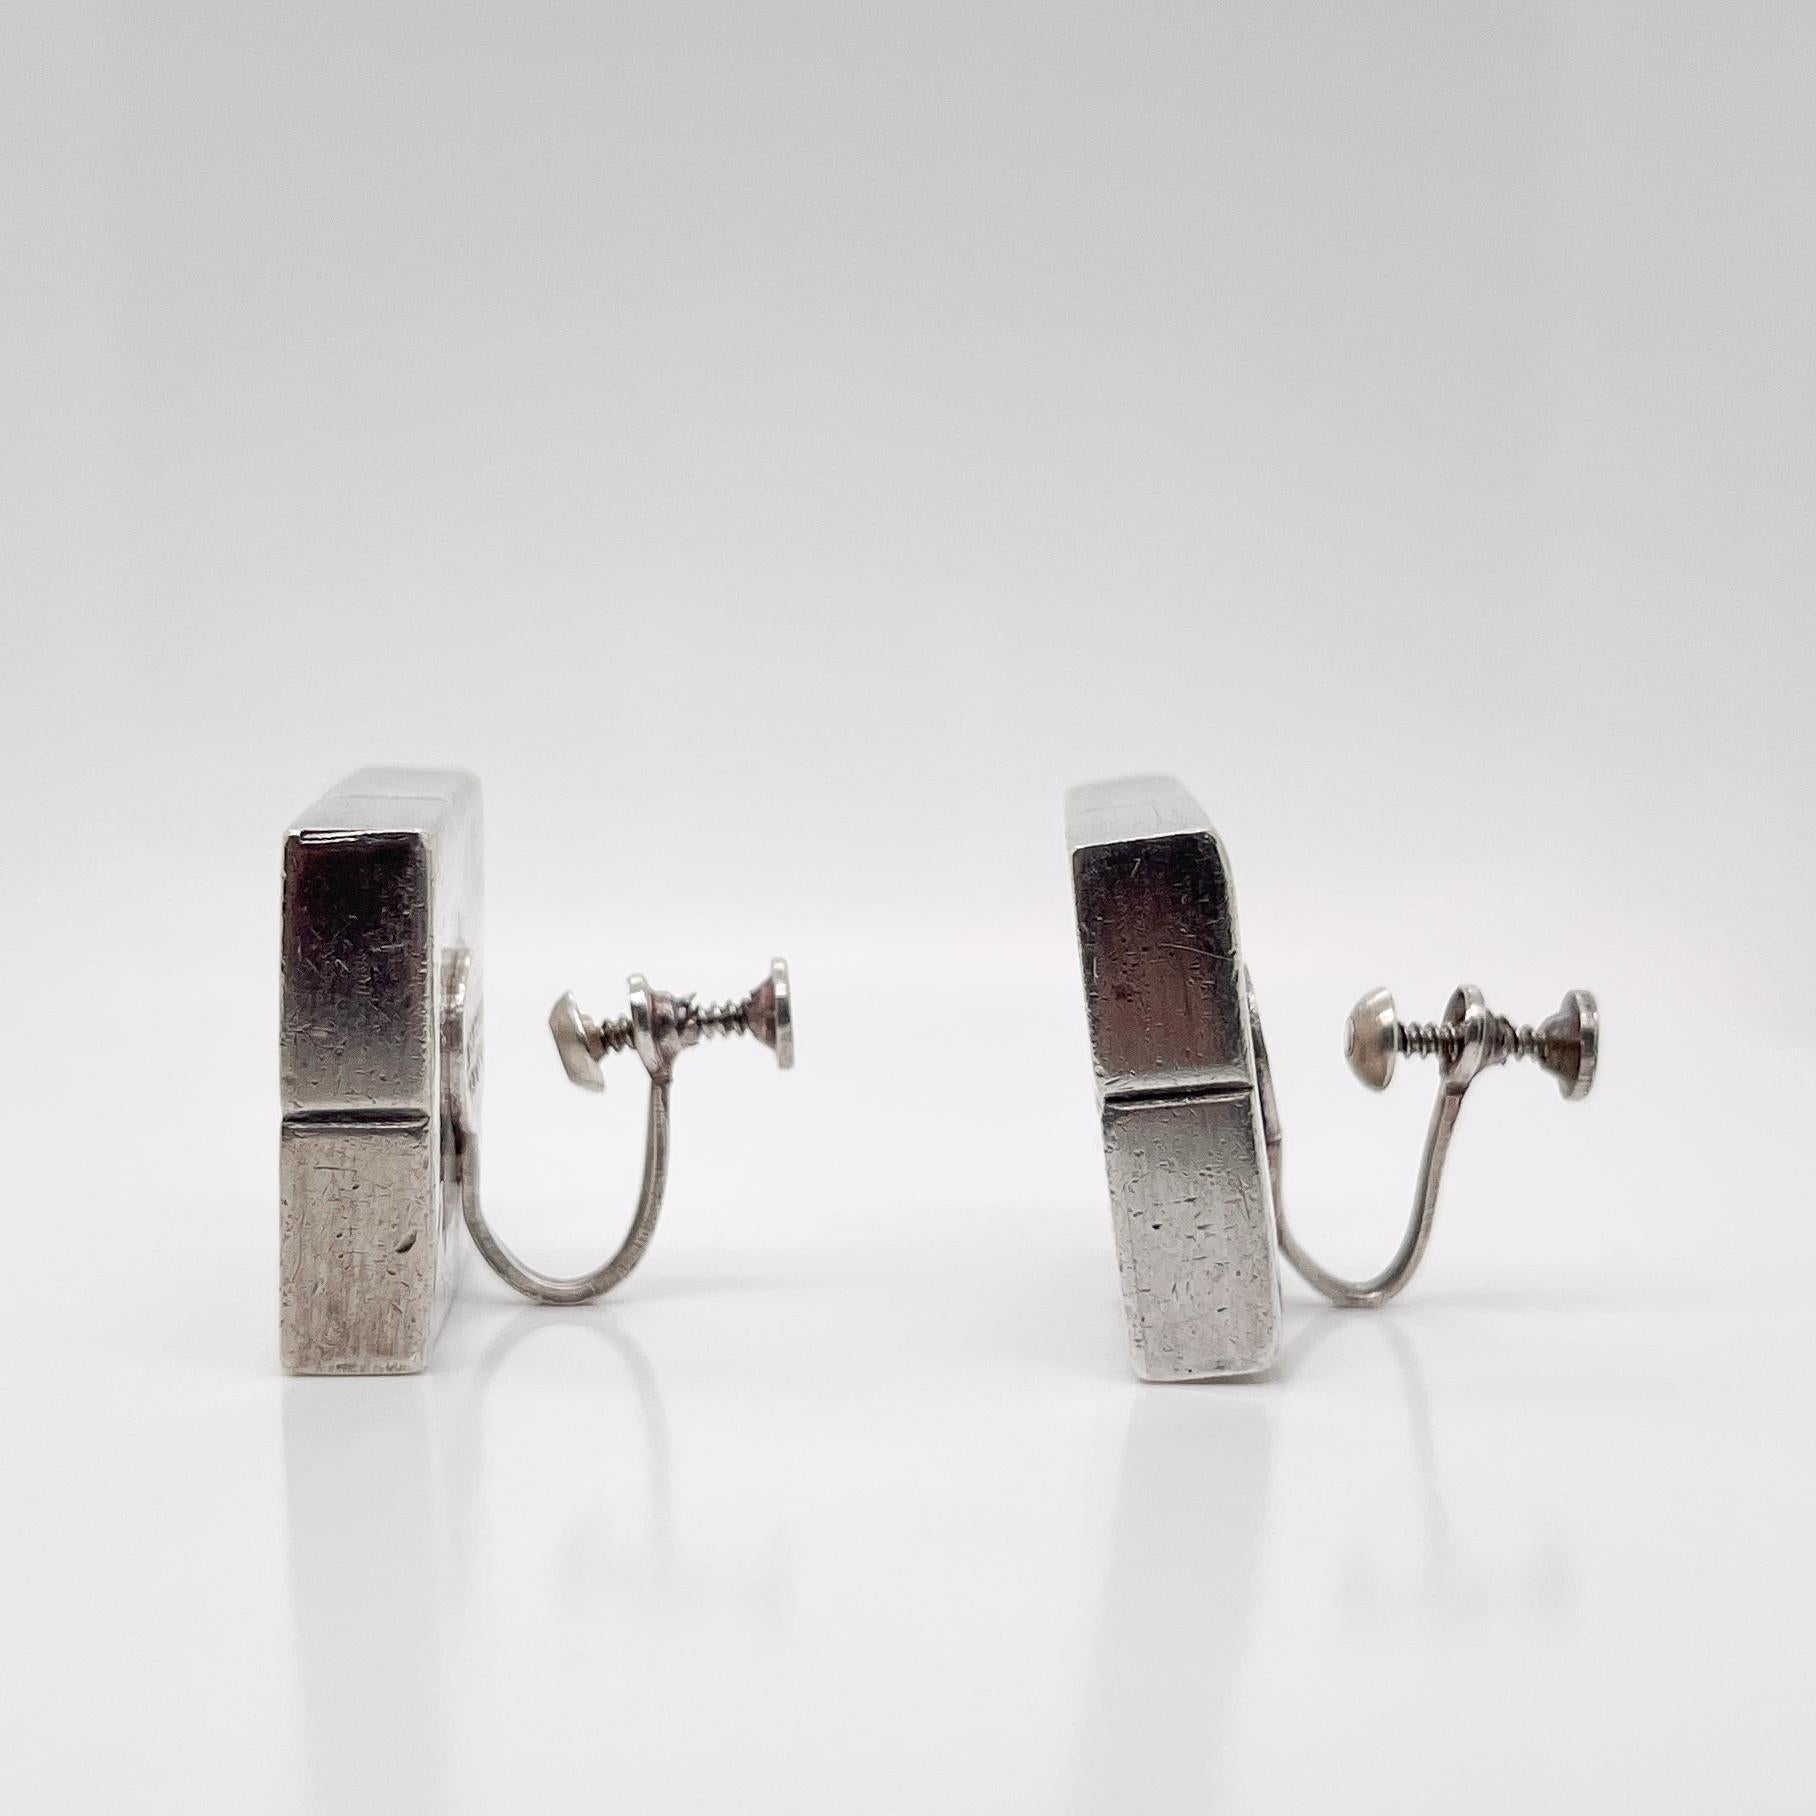 Vintage Mexican William Spratling Silver Modernist Square Cube Earrings & Brooch For Sale 5